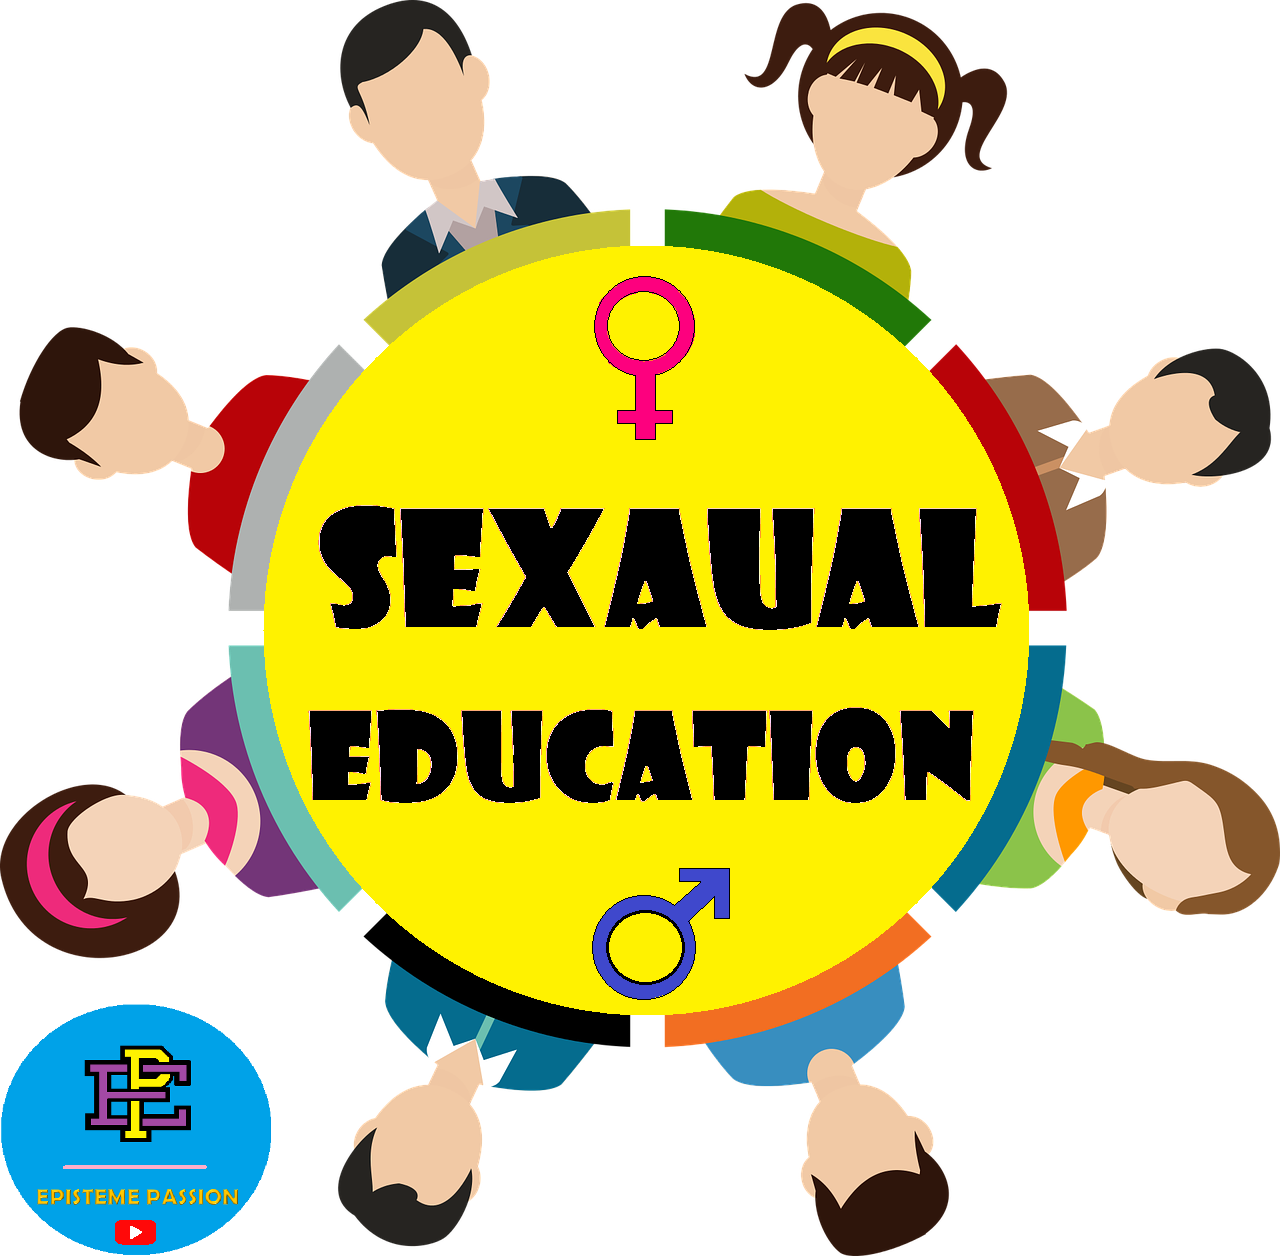 what is the importance of sexuality education